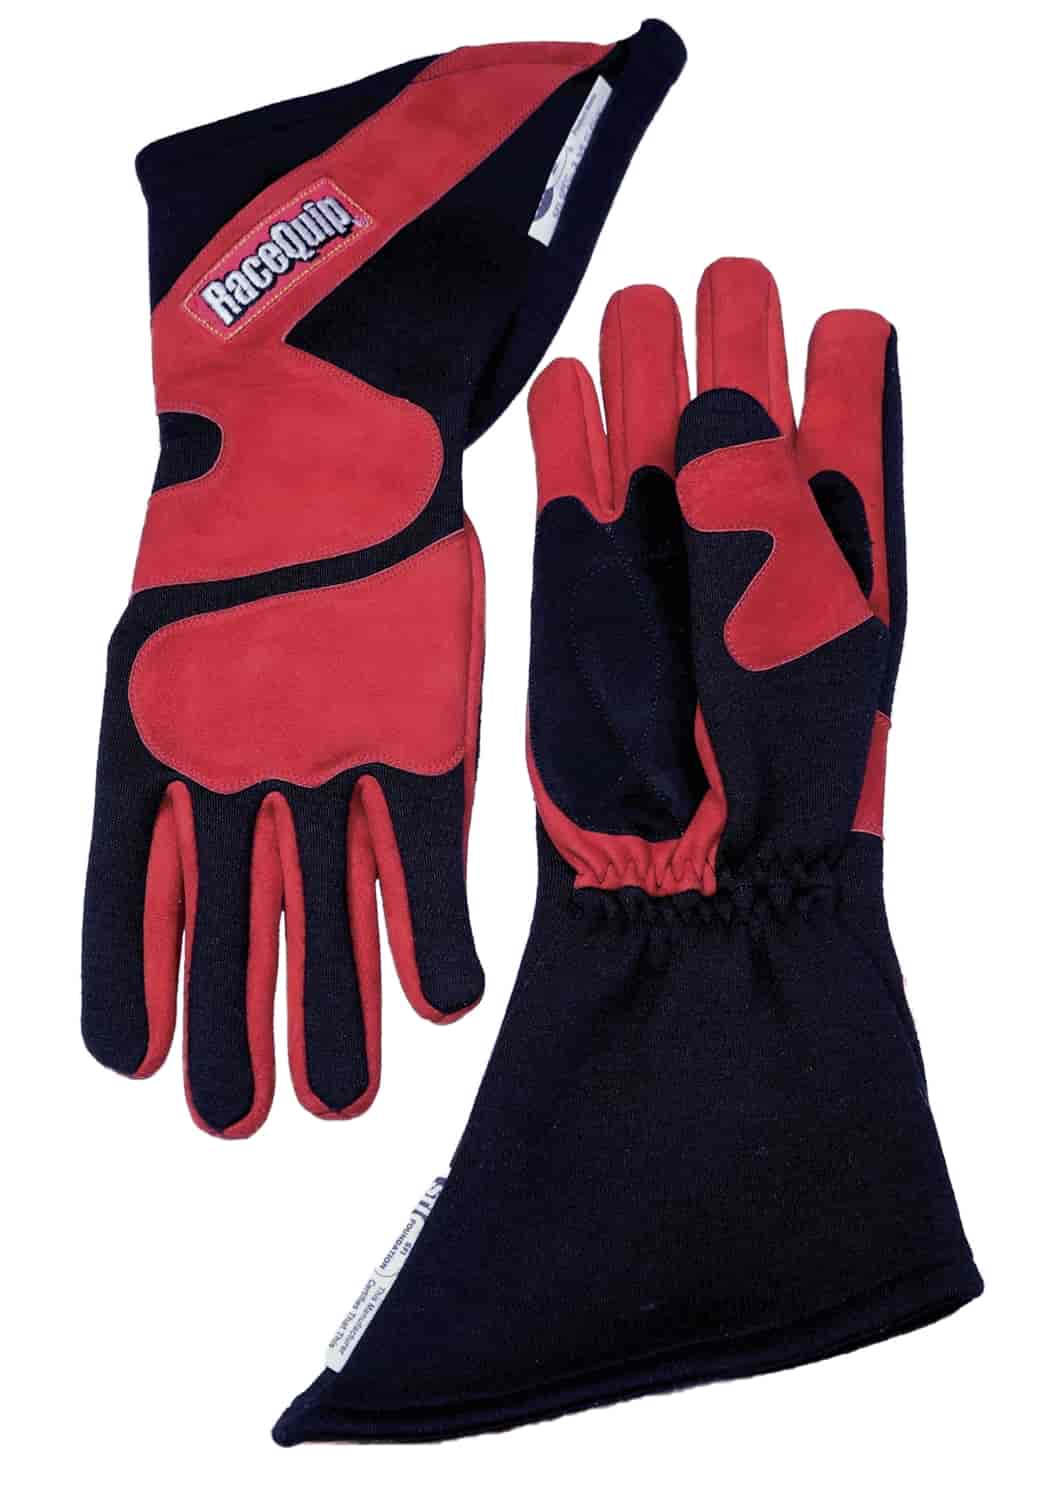 SFI-5 358 Series Long Angle Cut Driving Gloves Red/Black Small